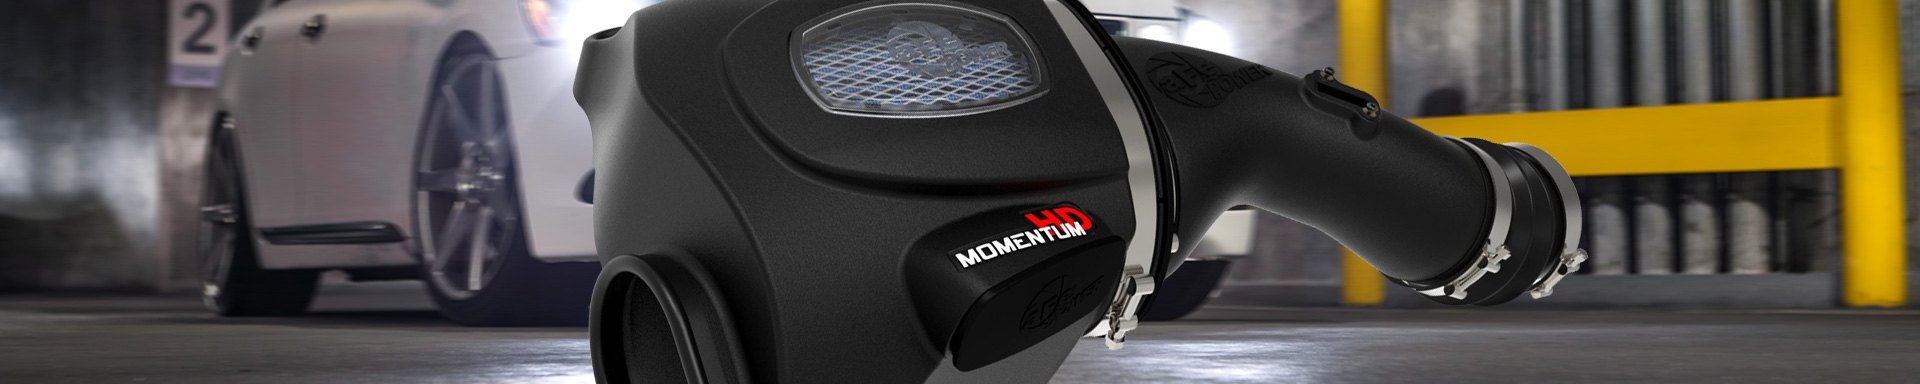 New Momentum HD Cold Air Intake System by aFe for Toyota Land Cruiser